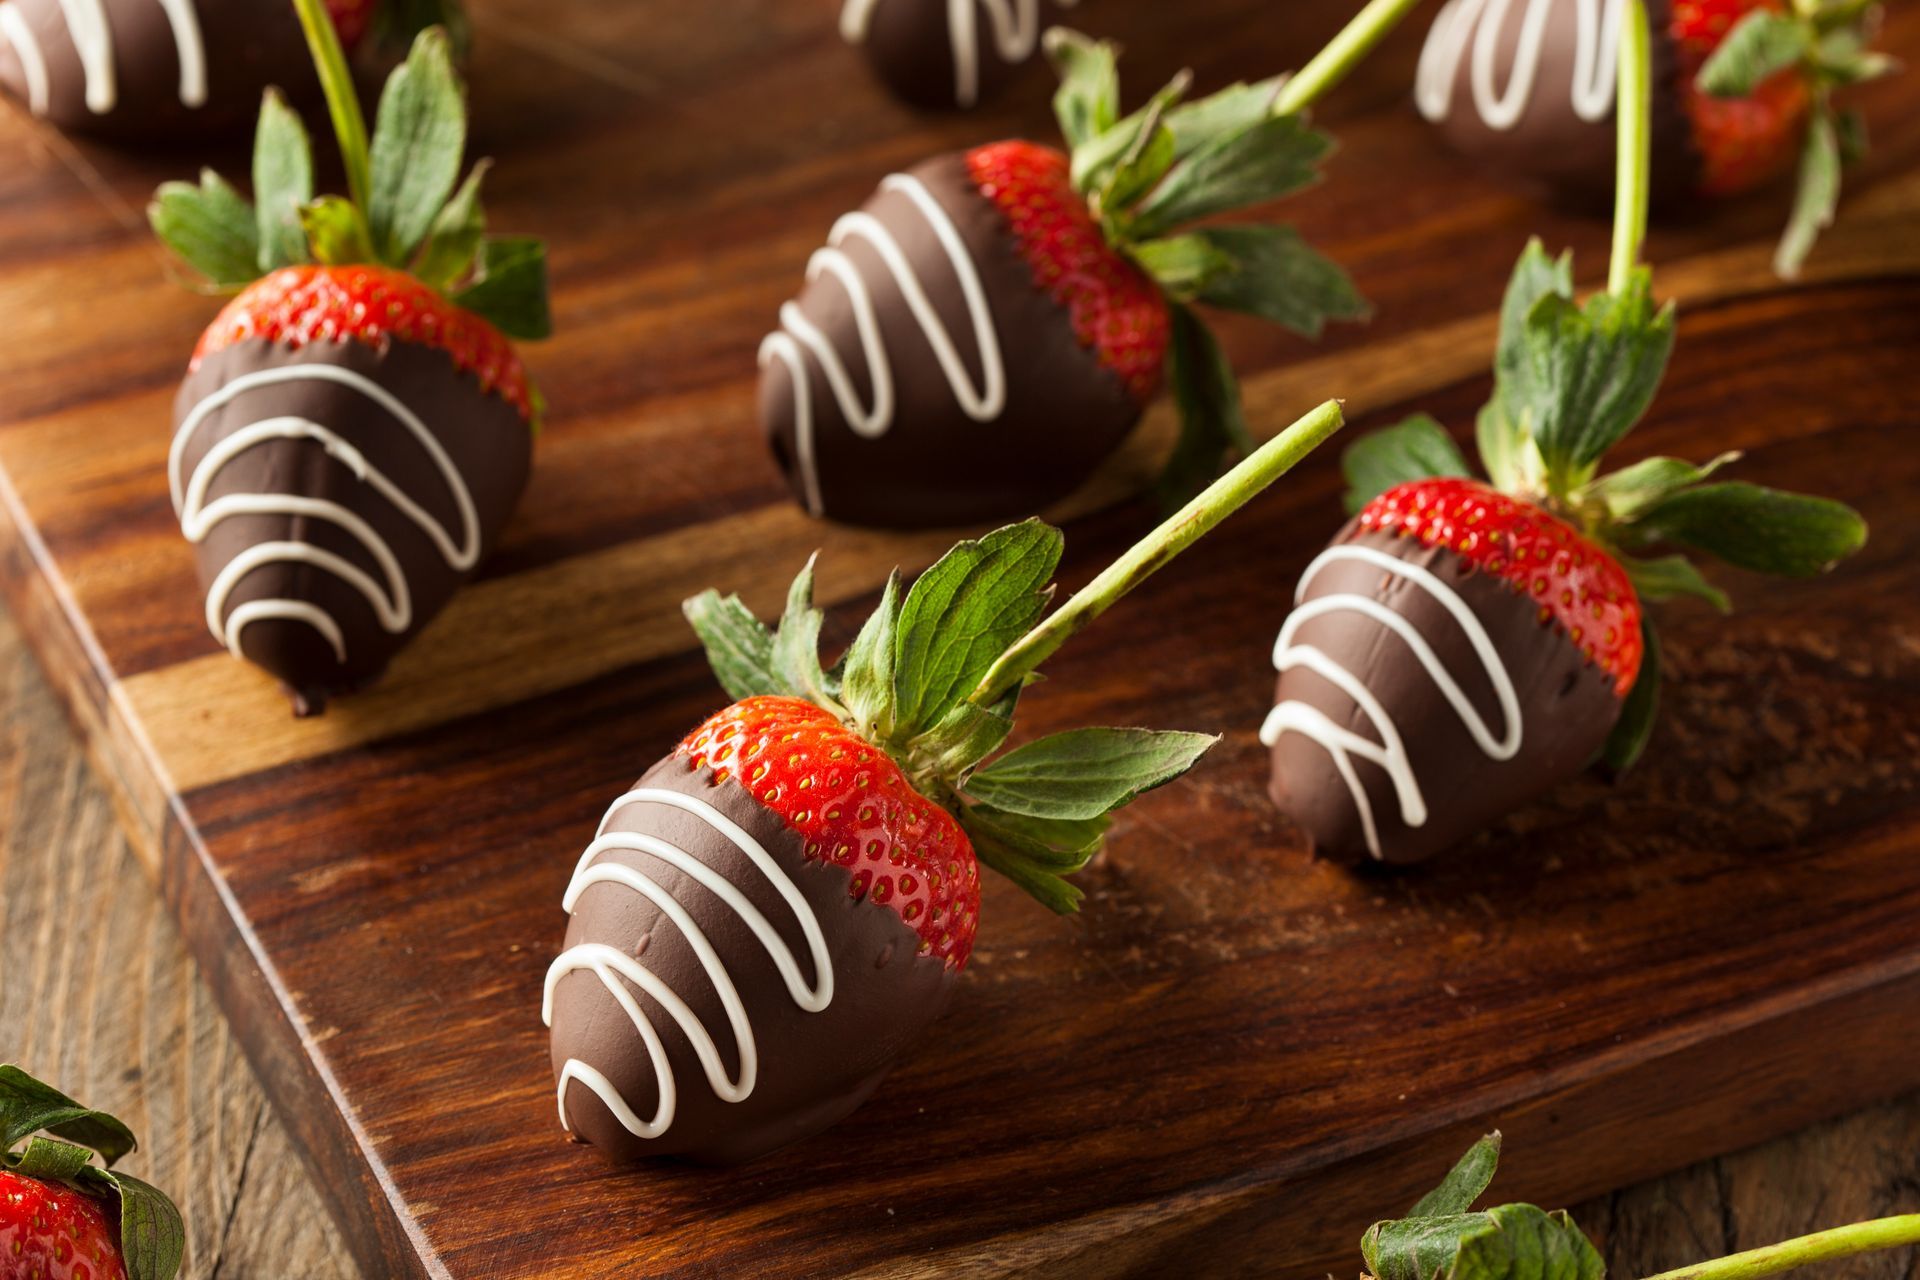 Delicious chocolate covered strawberries with a white chocolate drizzle for Valentine's Day